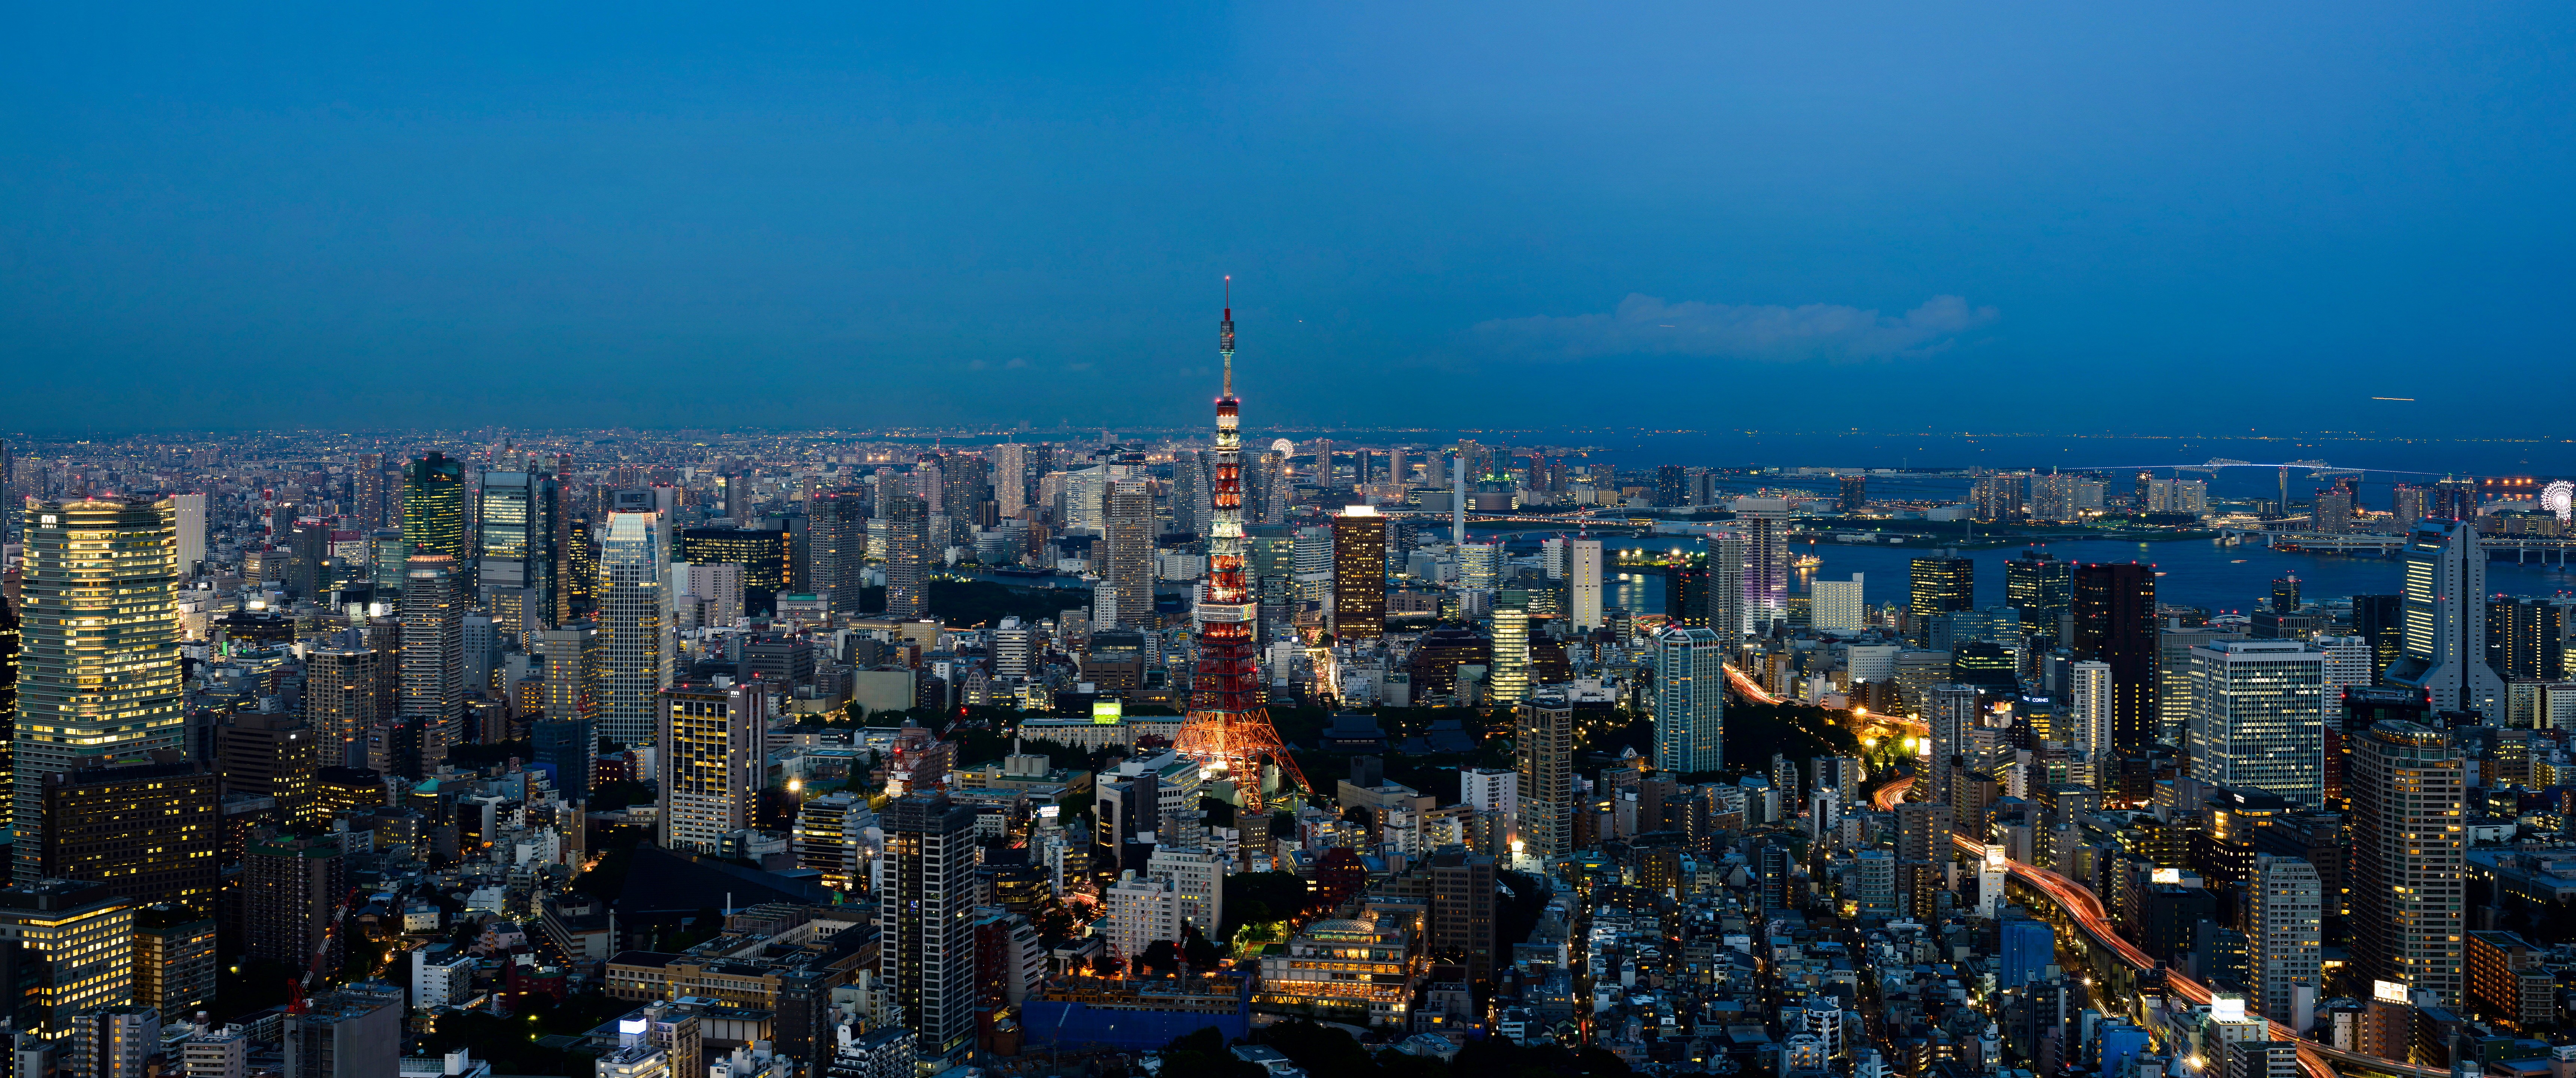 General 6880x2880 Tokyo Tokyo Tower cityscape city city lights dusk Asia